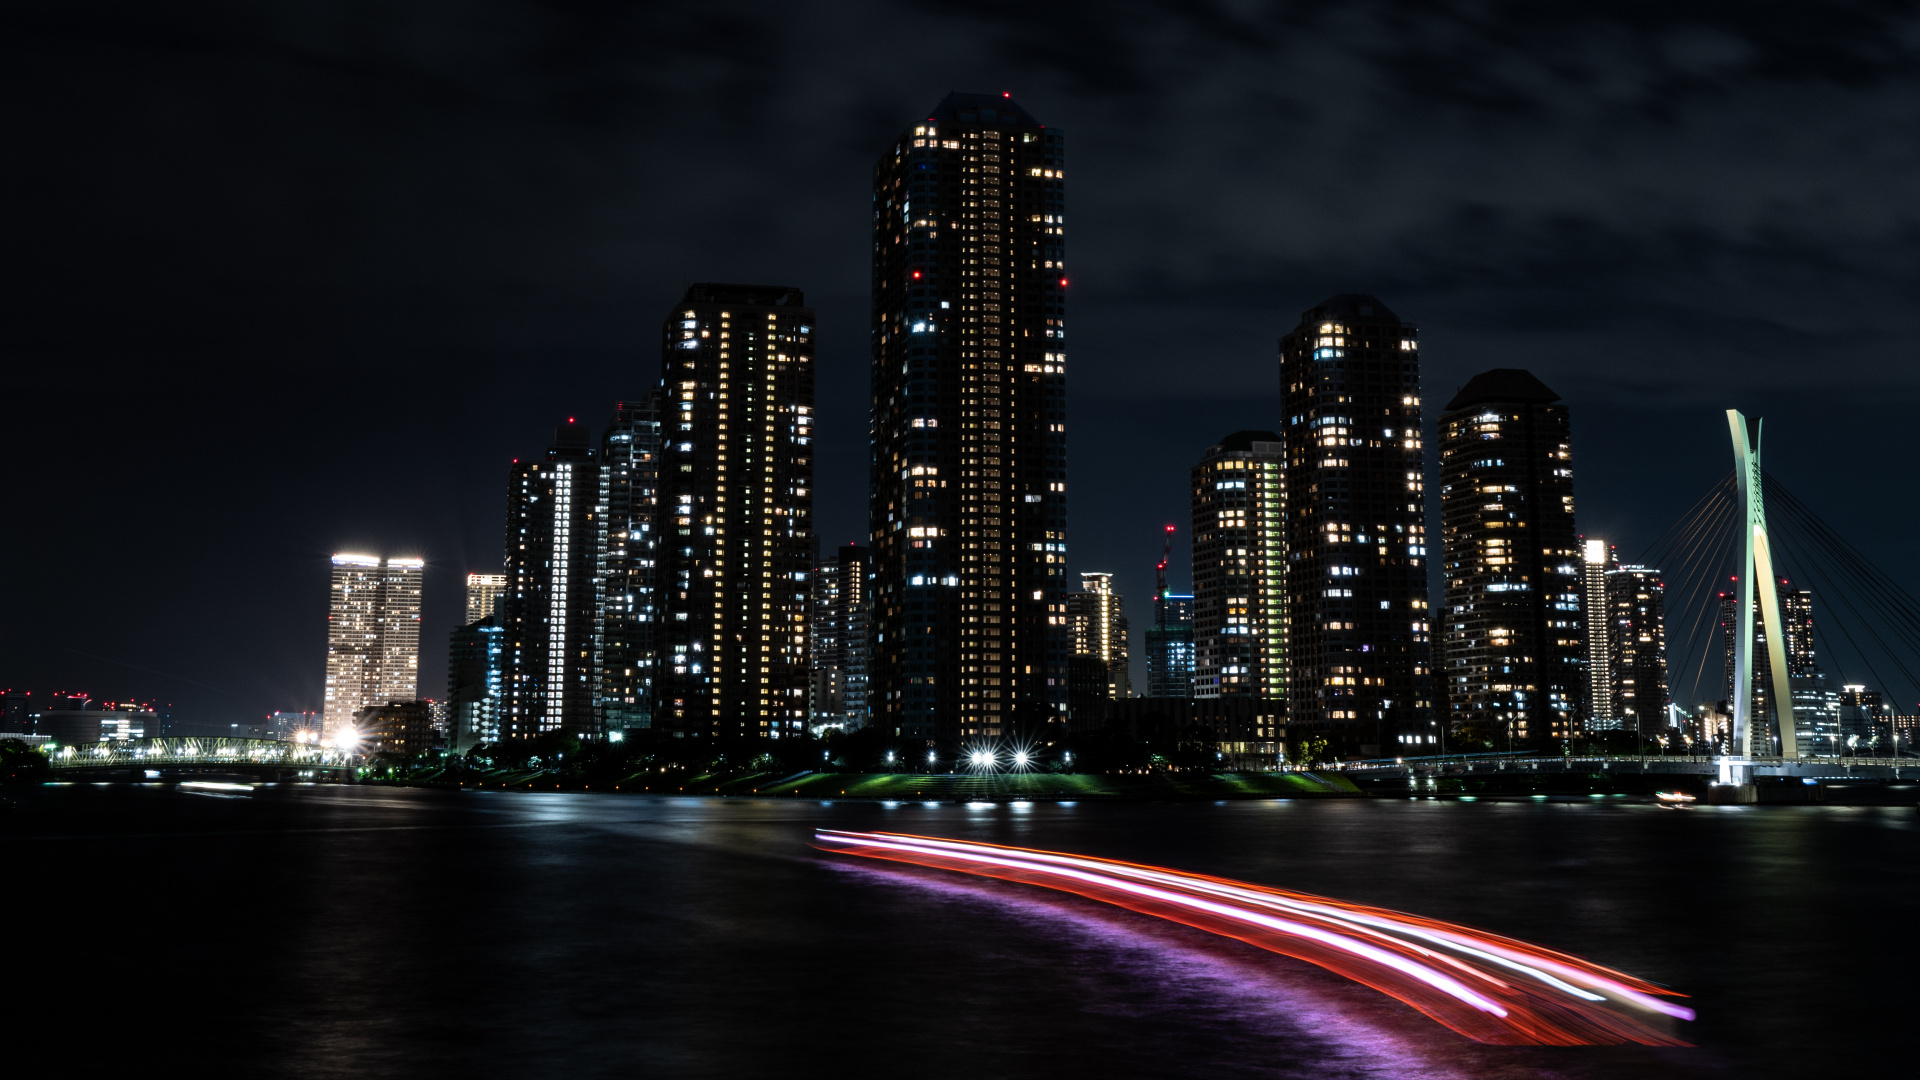 City Skyline During Night Time. Wallpaper in 1920x1080 Resolution